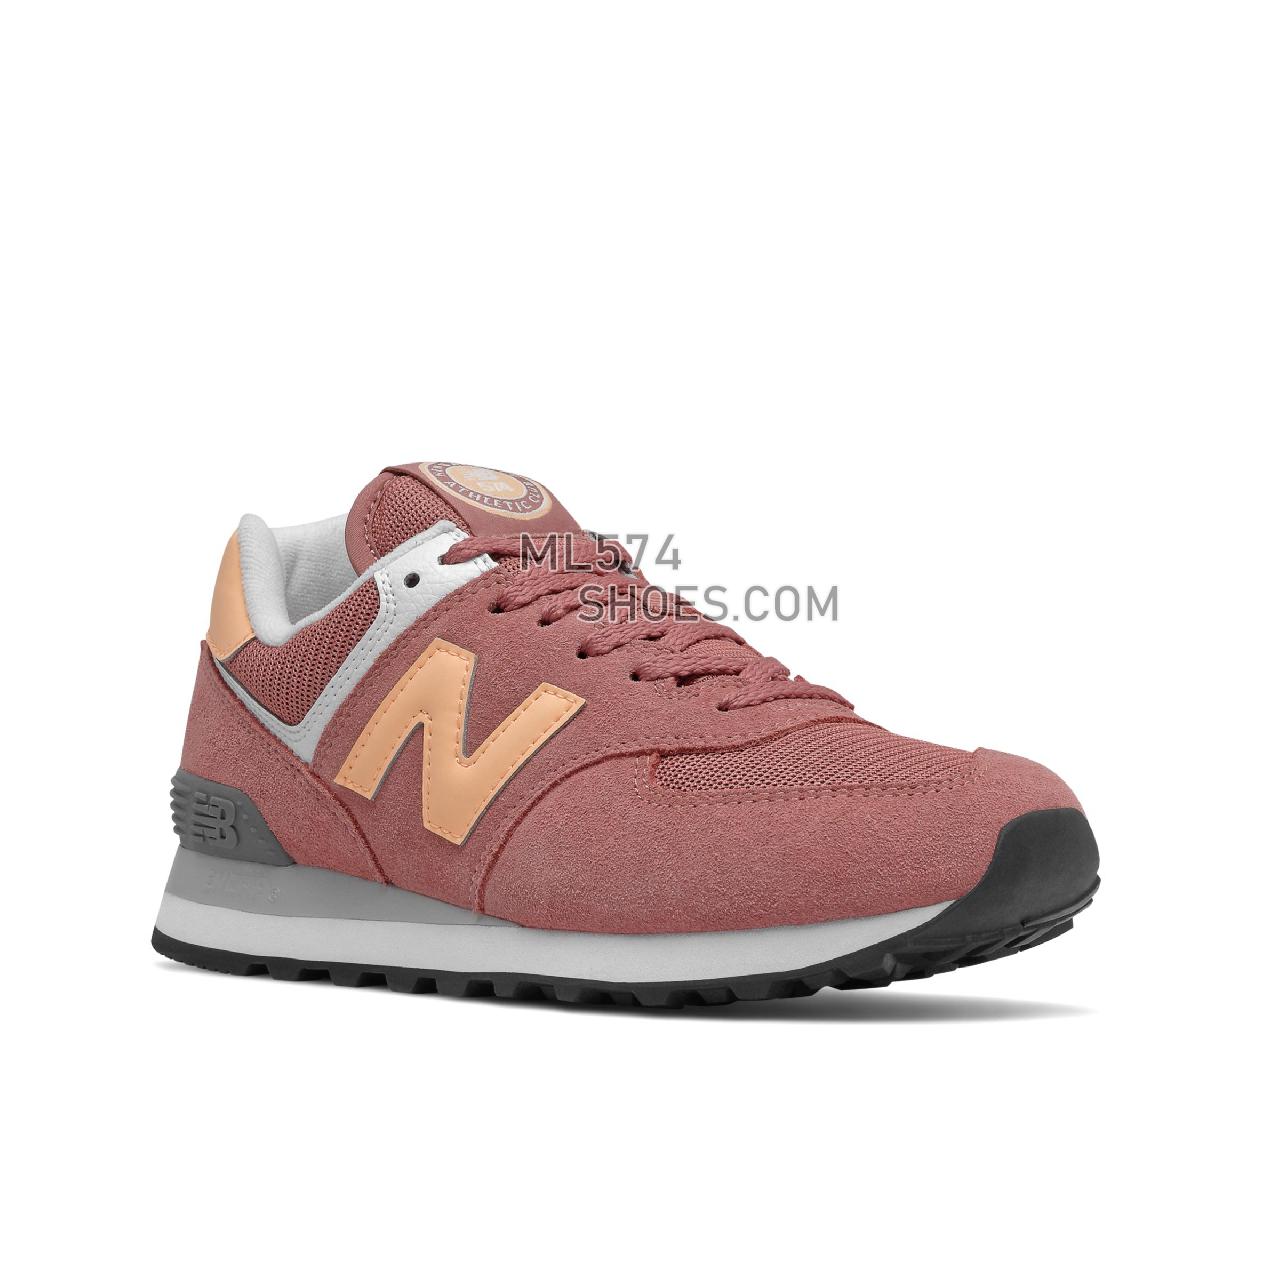 New Balance 574 - Women's Classic Sneakers - Astral Glow with Washed Henna - WL574HD2